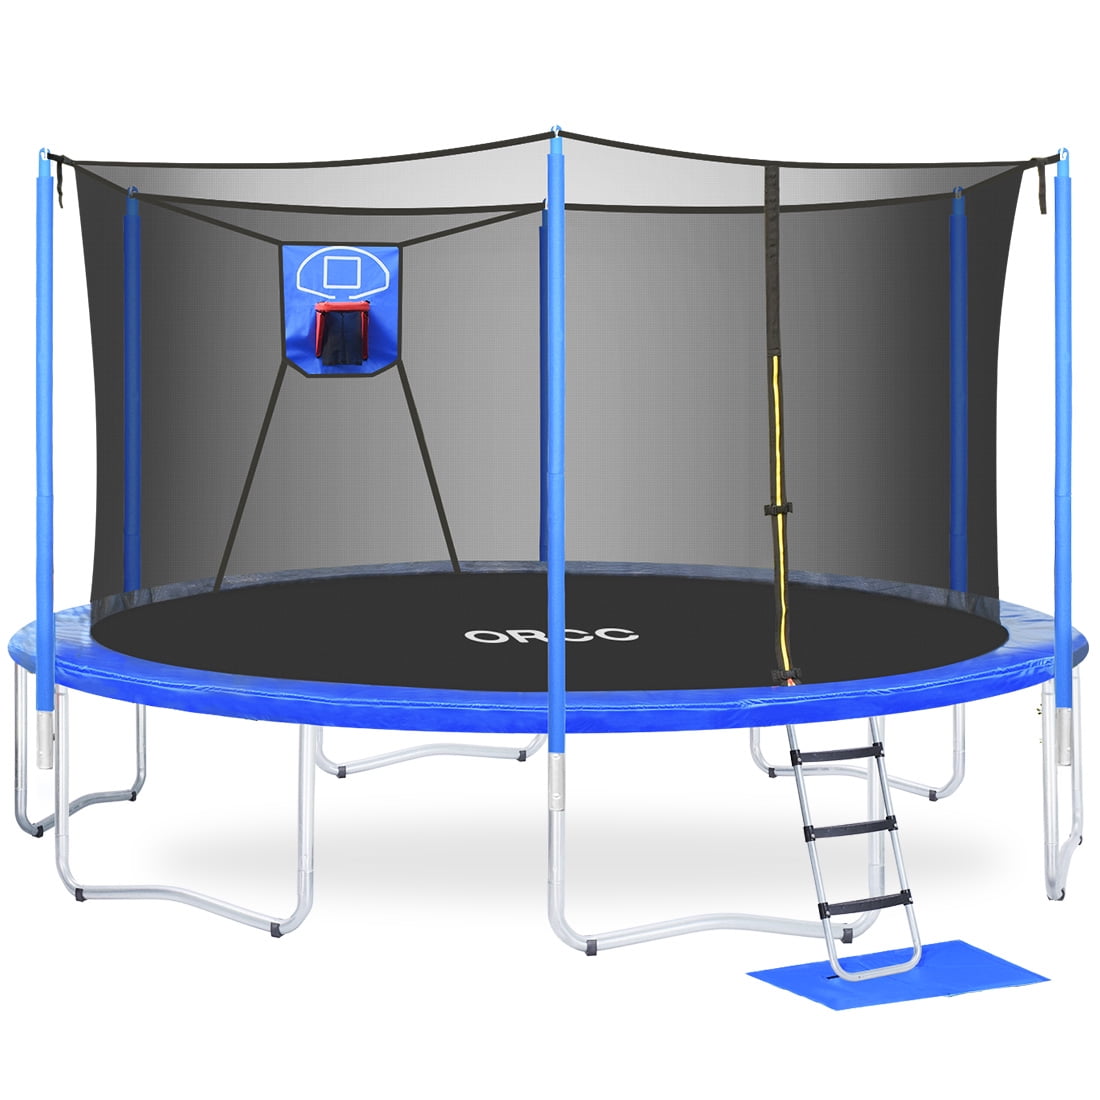 Safe Outdoor Trampoline for Backyard ORCC 16 15 14 12 10 8FT Trampoline 450 LBS Weight Capacity for Kids Adults with Safety Enclosure Net Wind Stakes Rain Cover Ladder 